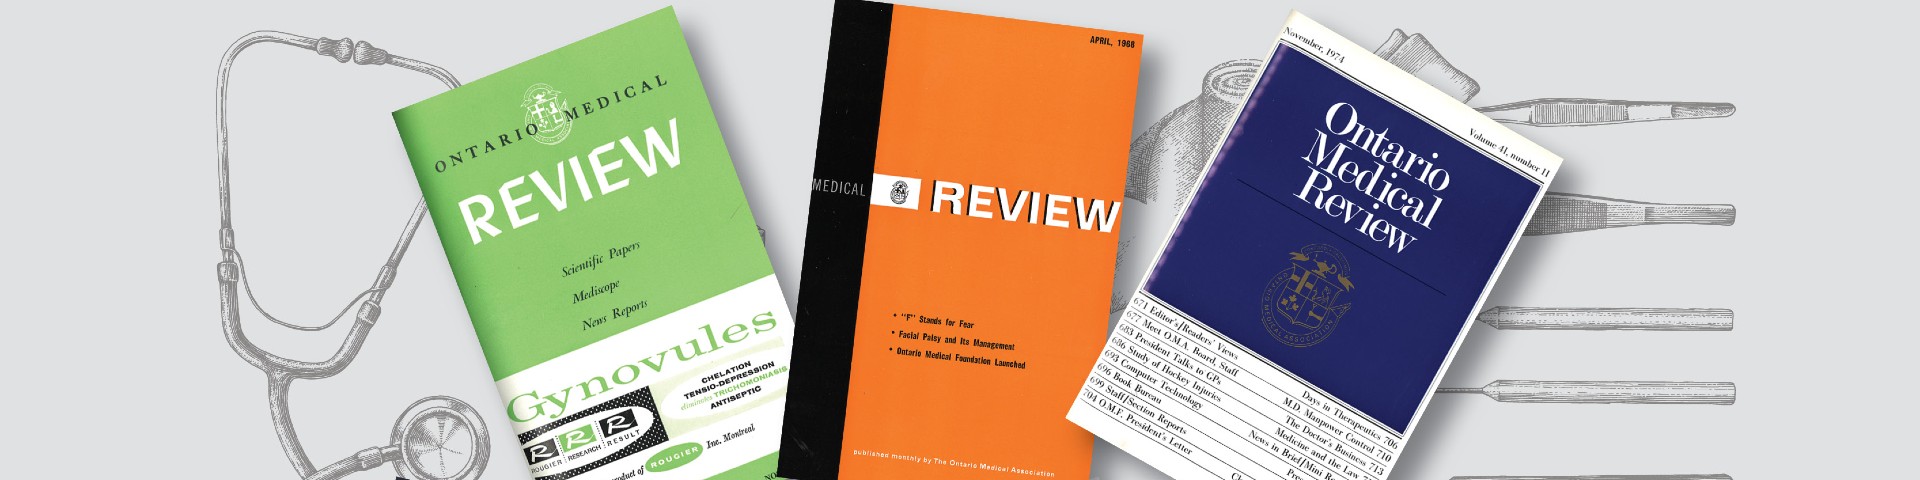 various Ontario Medical Review covers